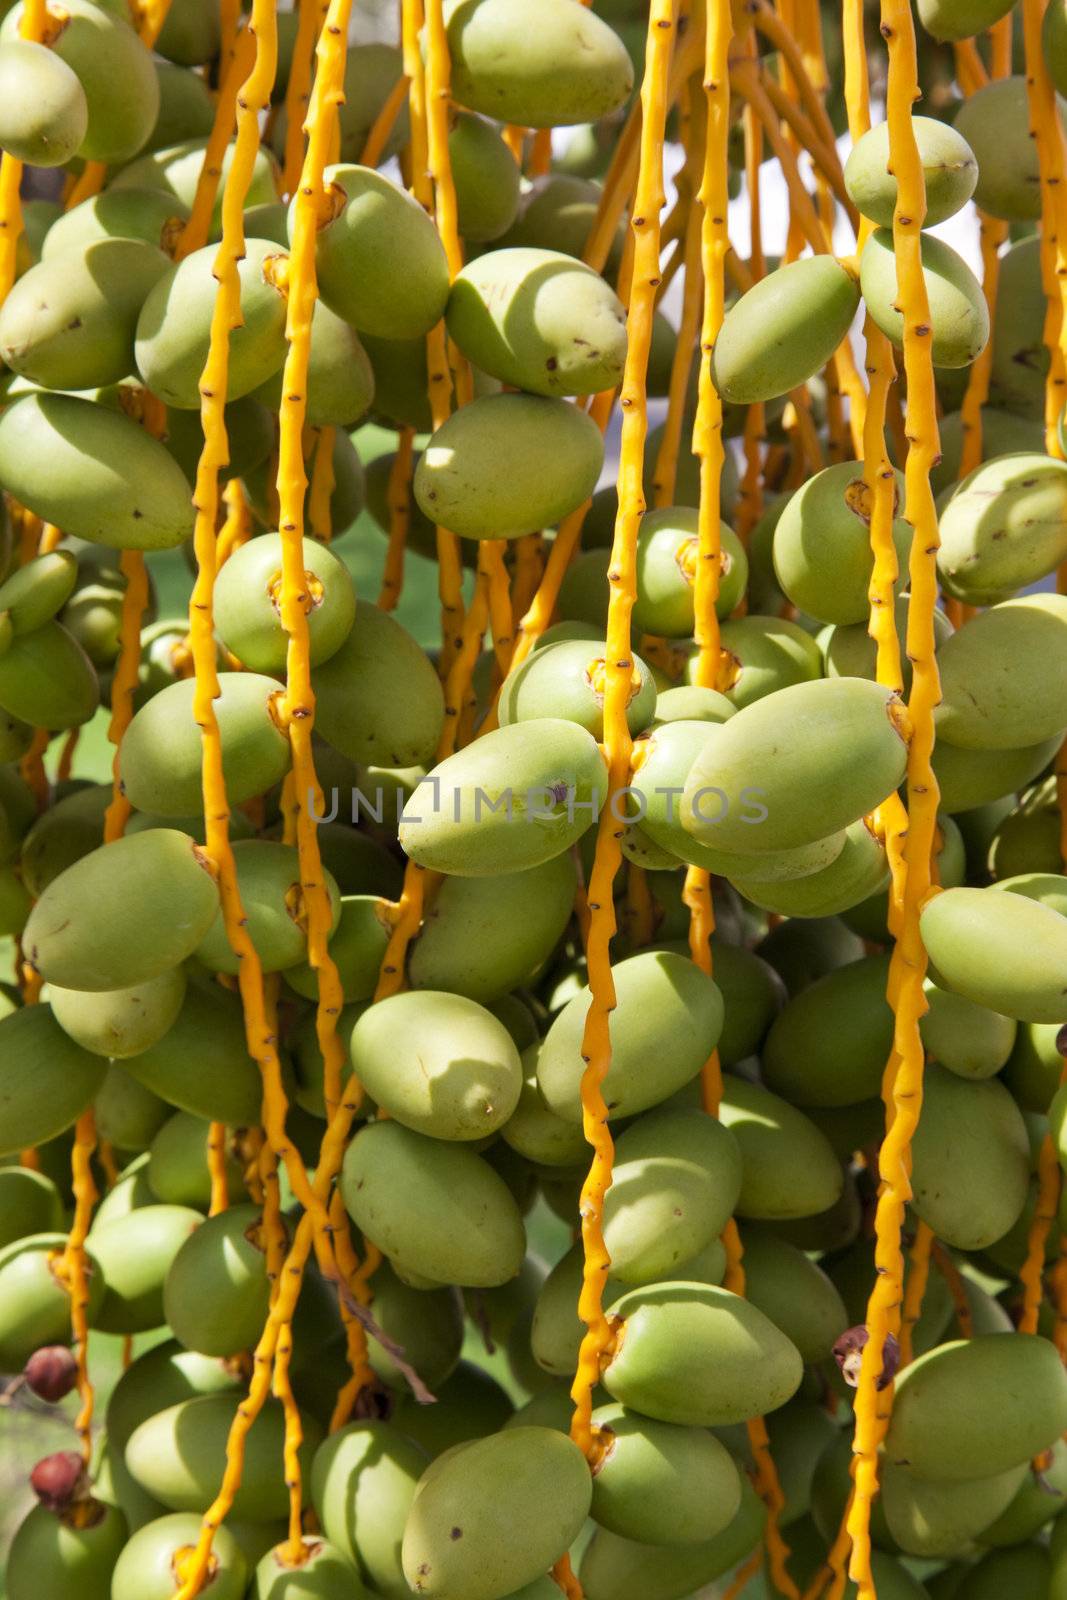 Dates Growing on Tree by shariffc